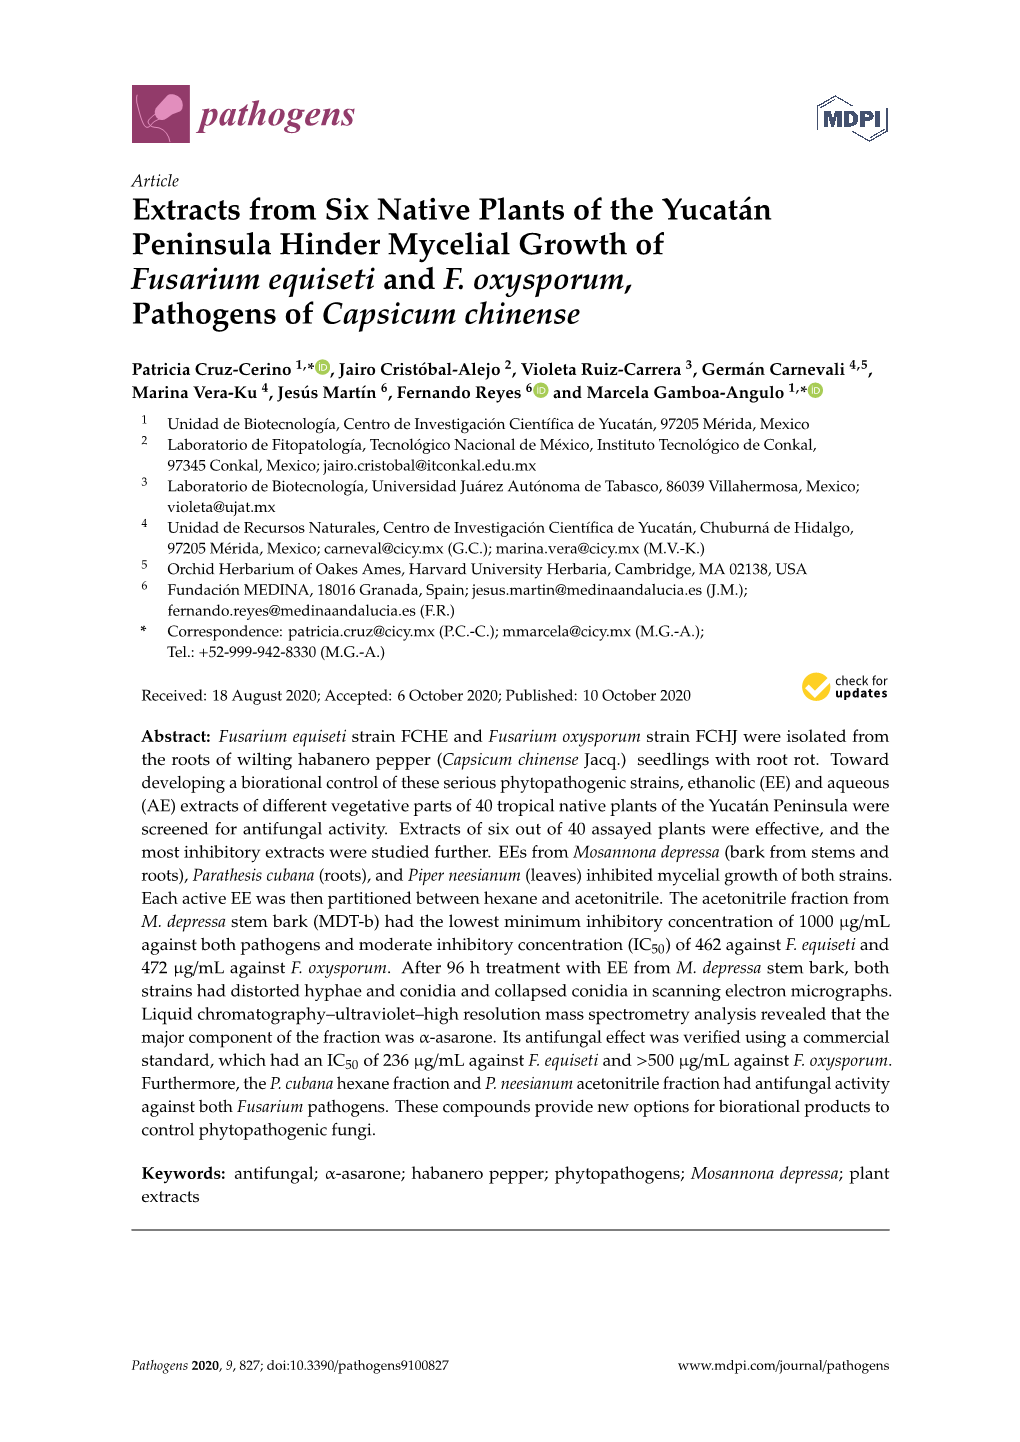 Extracts from Six Native Plants of the Yucatán Peninsula Hinder Mycelial Growth of Fusarium Equiseti and F